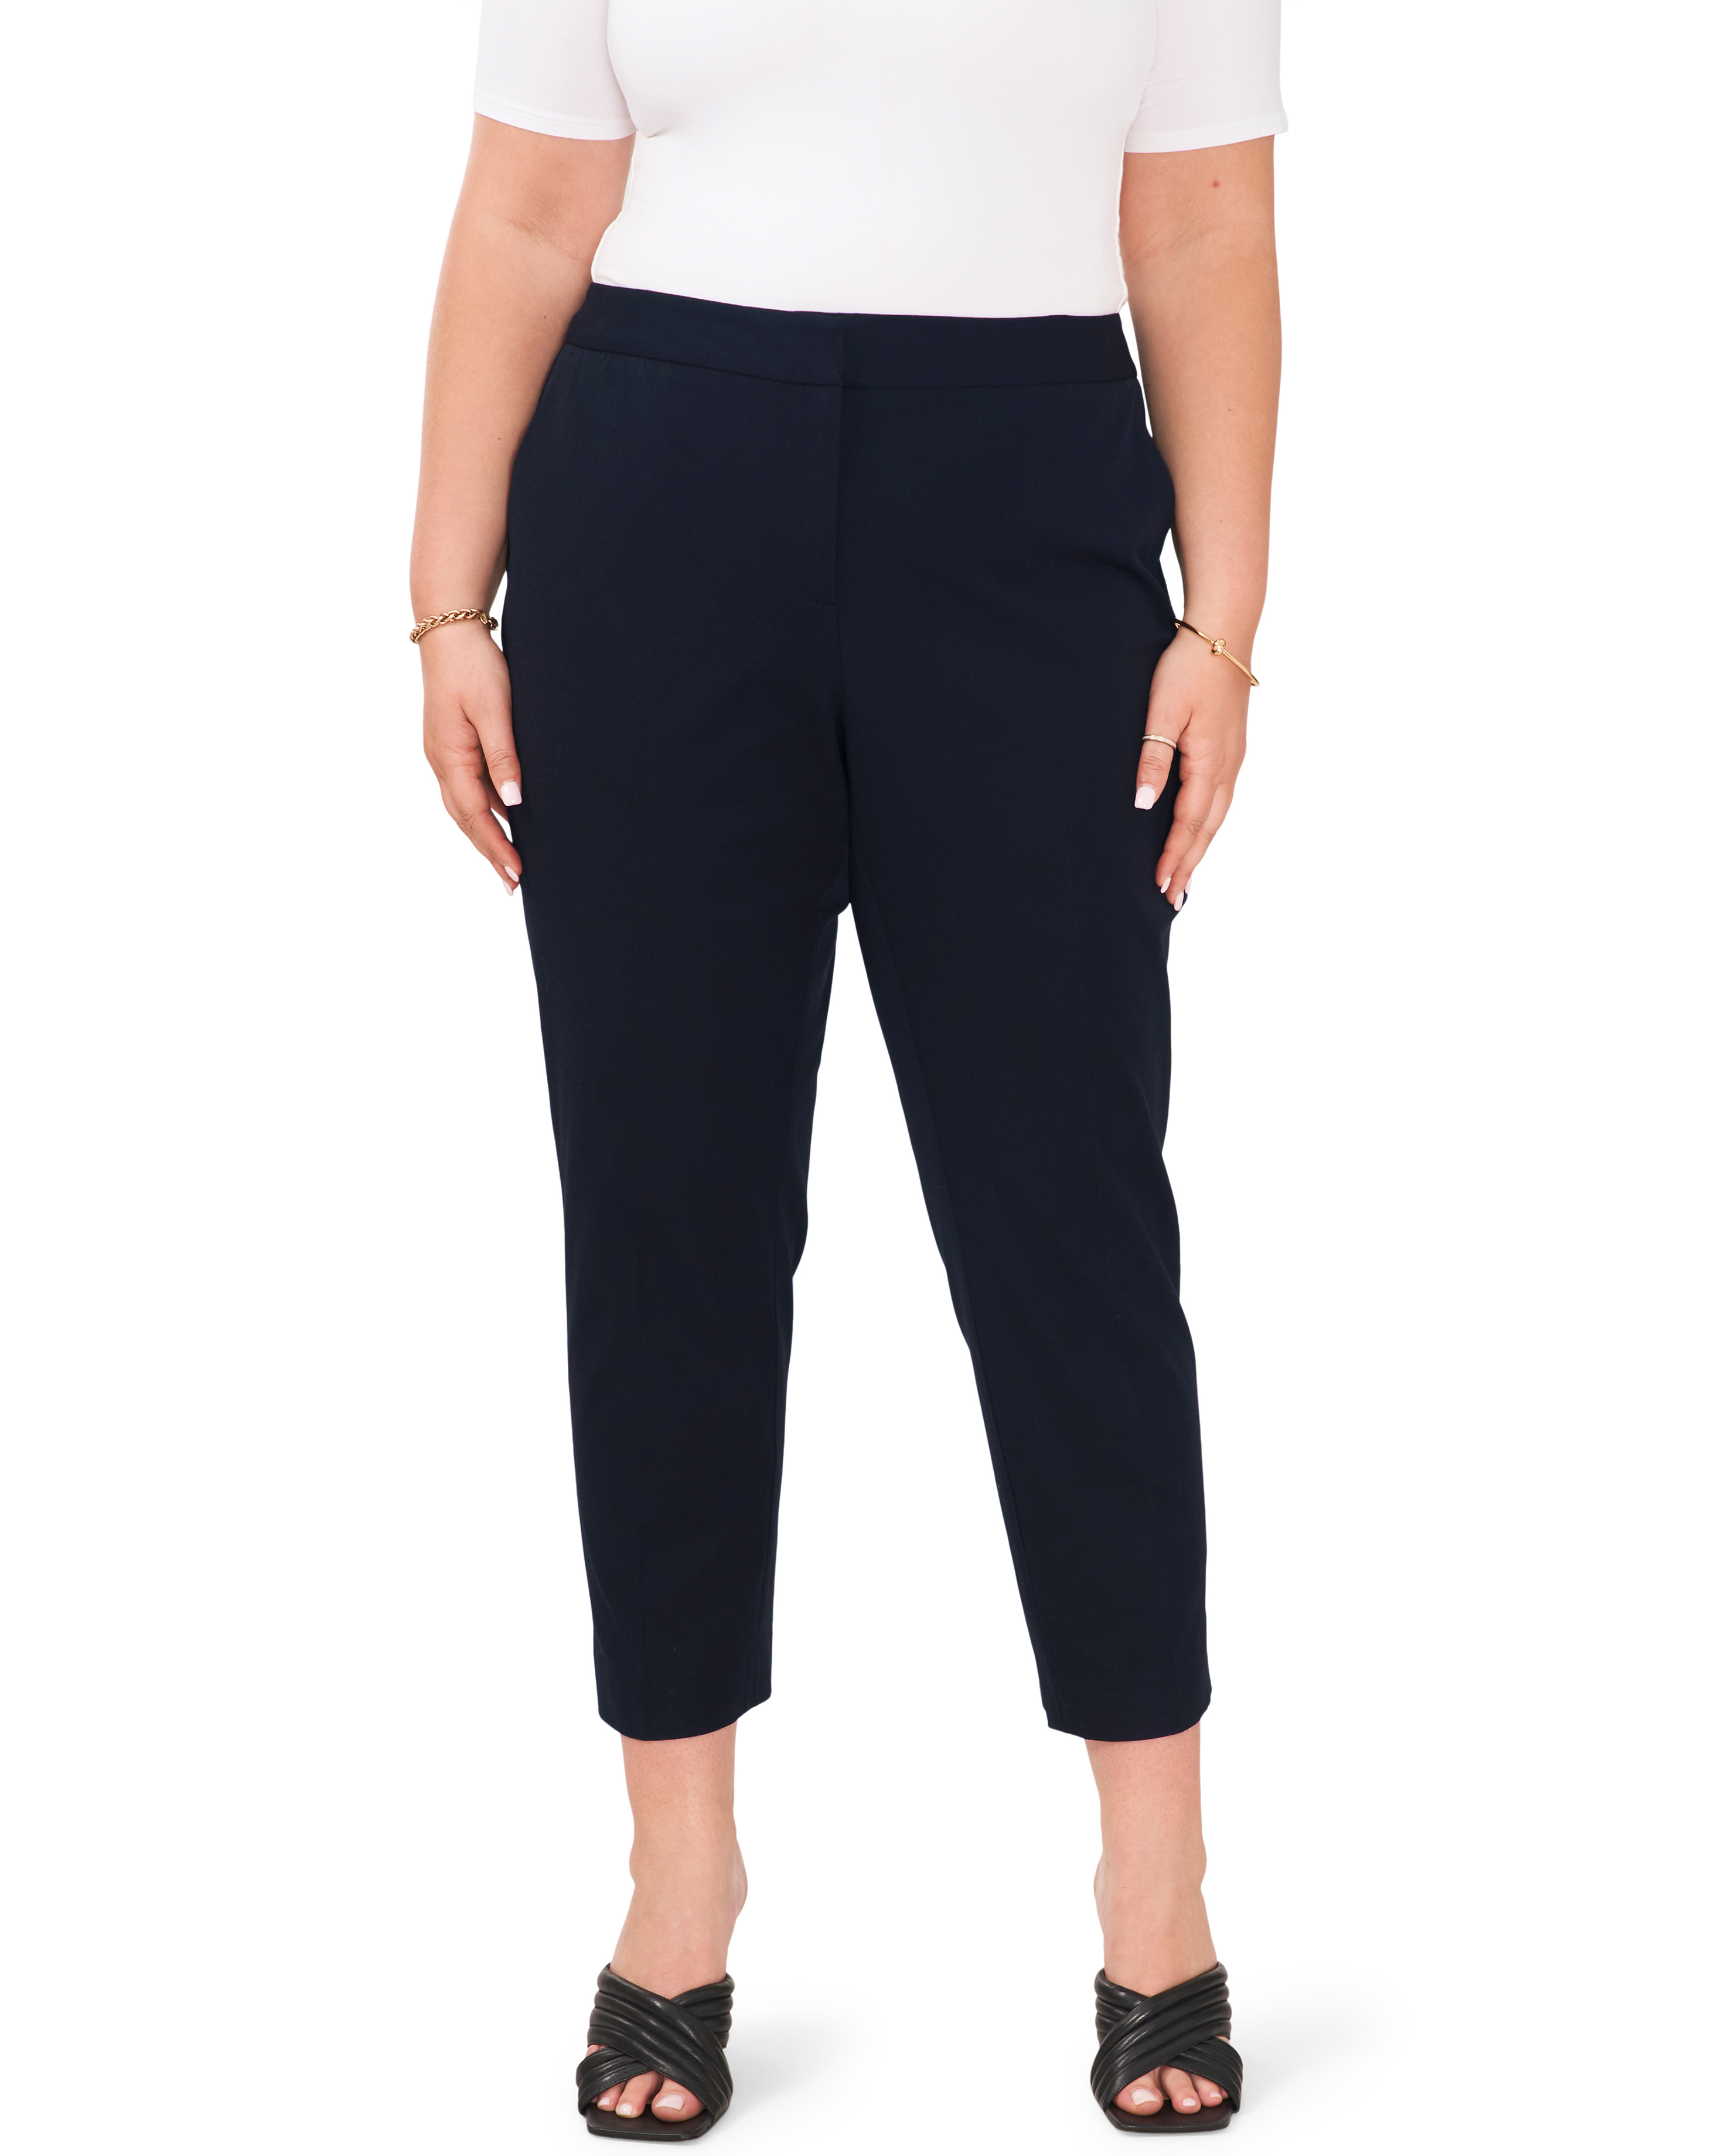 Women's Vince Camuto Twill Cropped Trousers (Plus Size) Size 22 Classic Navy